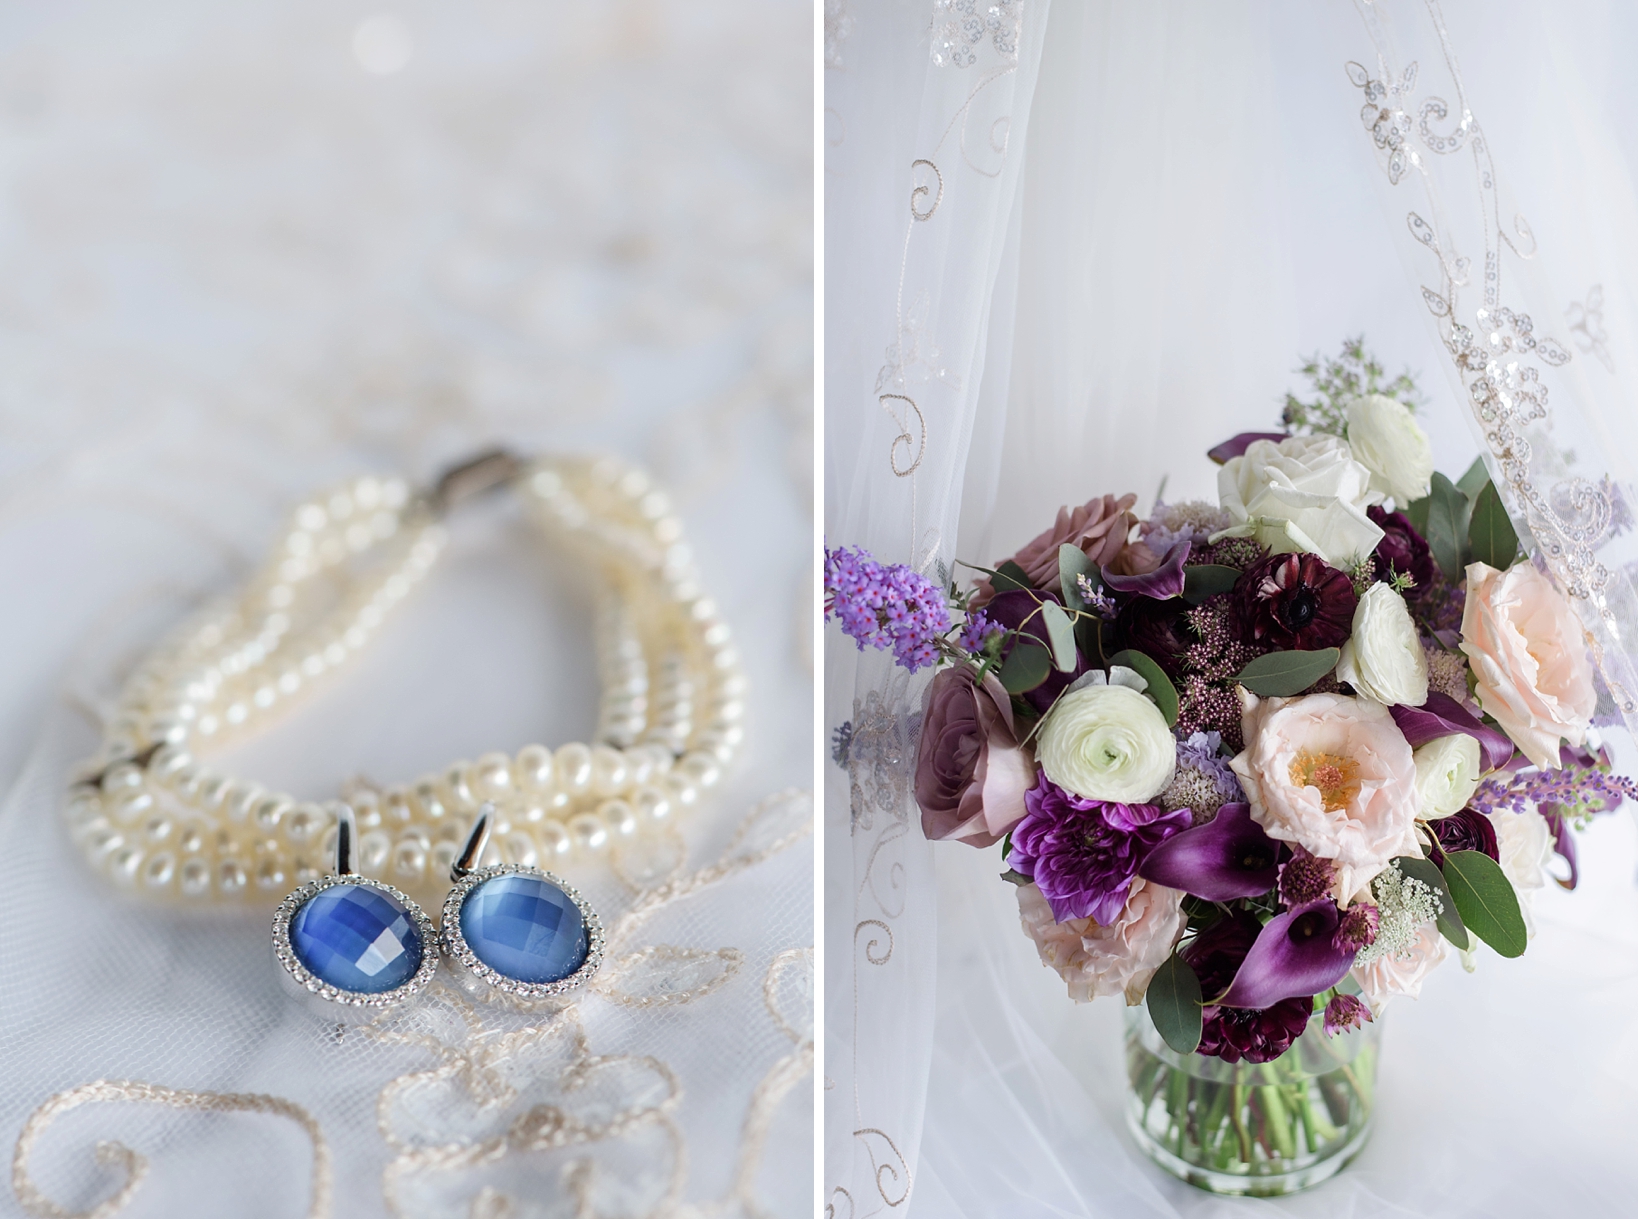 Pearls and lace with the bride's floral bouquet by Sarah & Ben Photography